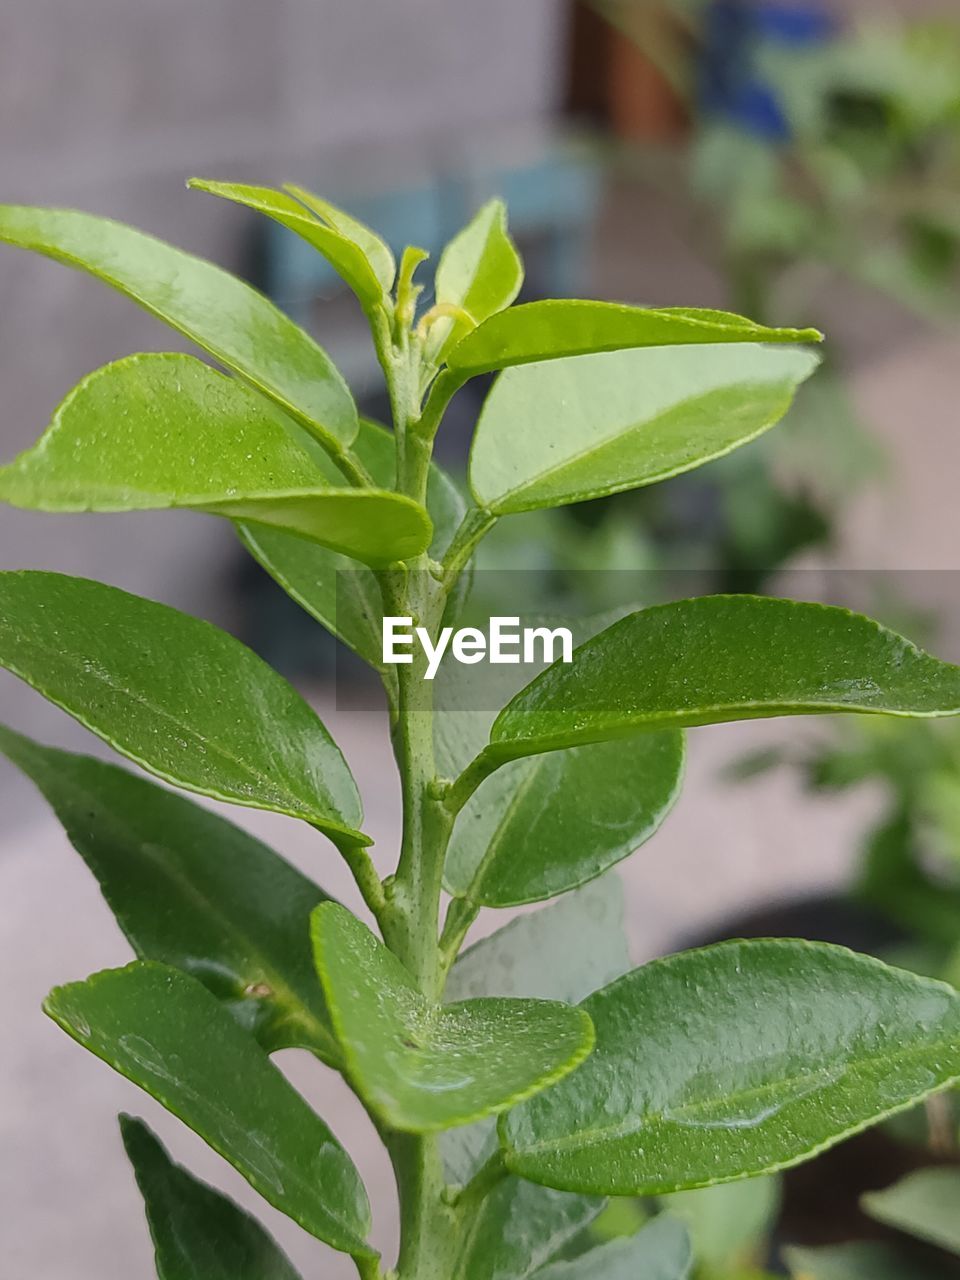 leaf, plant part, plant, growth, nature, flower, green, food, food and drink, close-up, herb, no people, shrub, outdoors, freshness, beauty in nature, agriculture, produce, environment, tree, common sage, medicine, focus on foreground